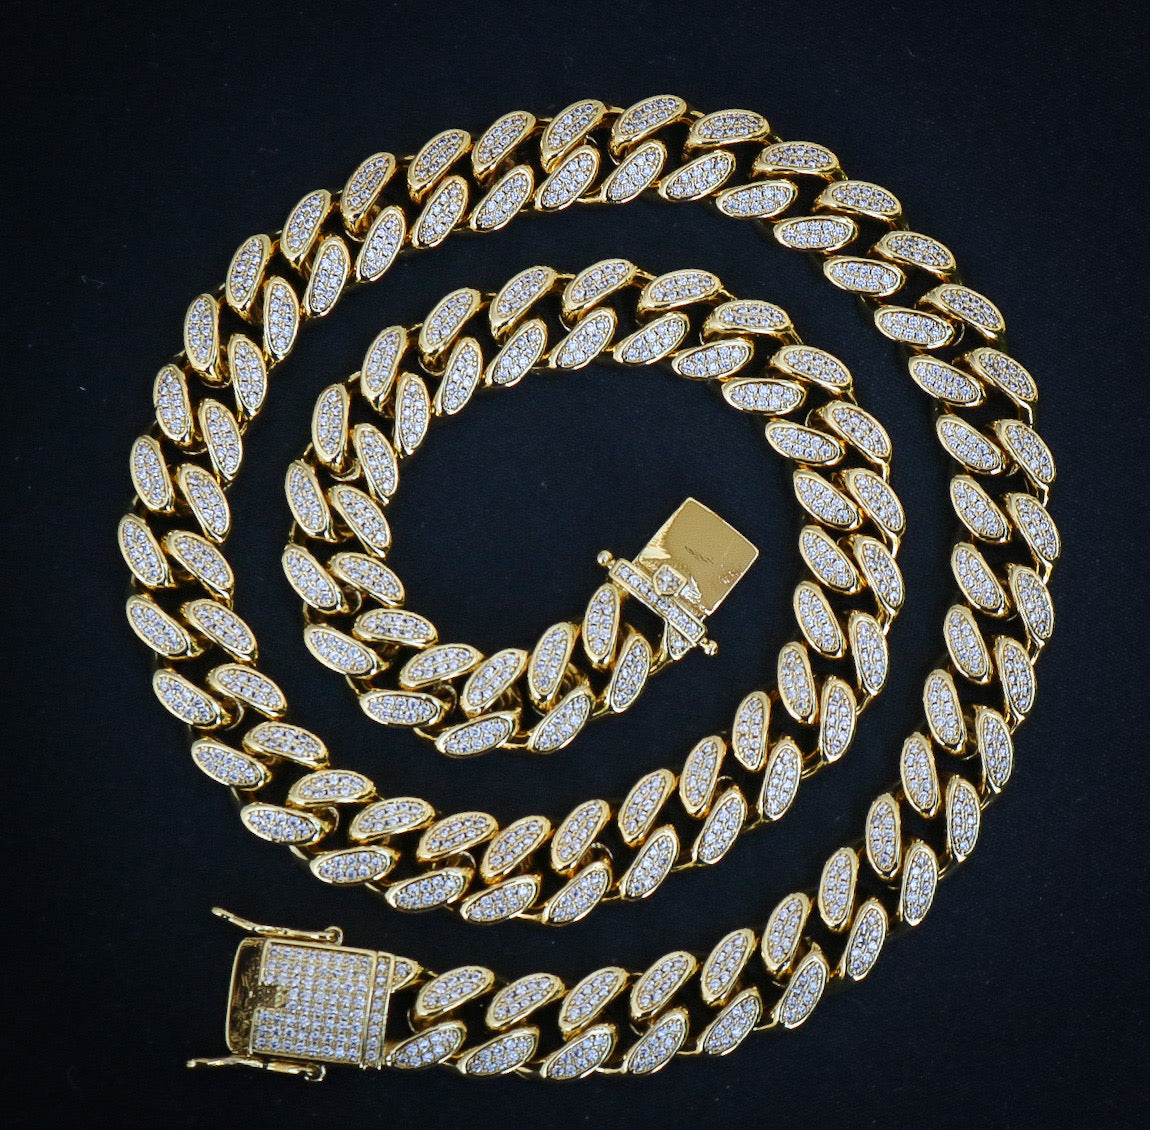 12mm Iced Out Miami Cuban Chain - Gold